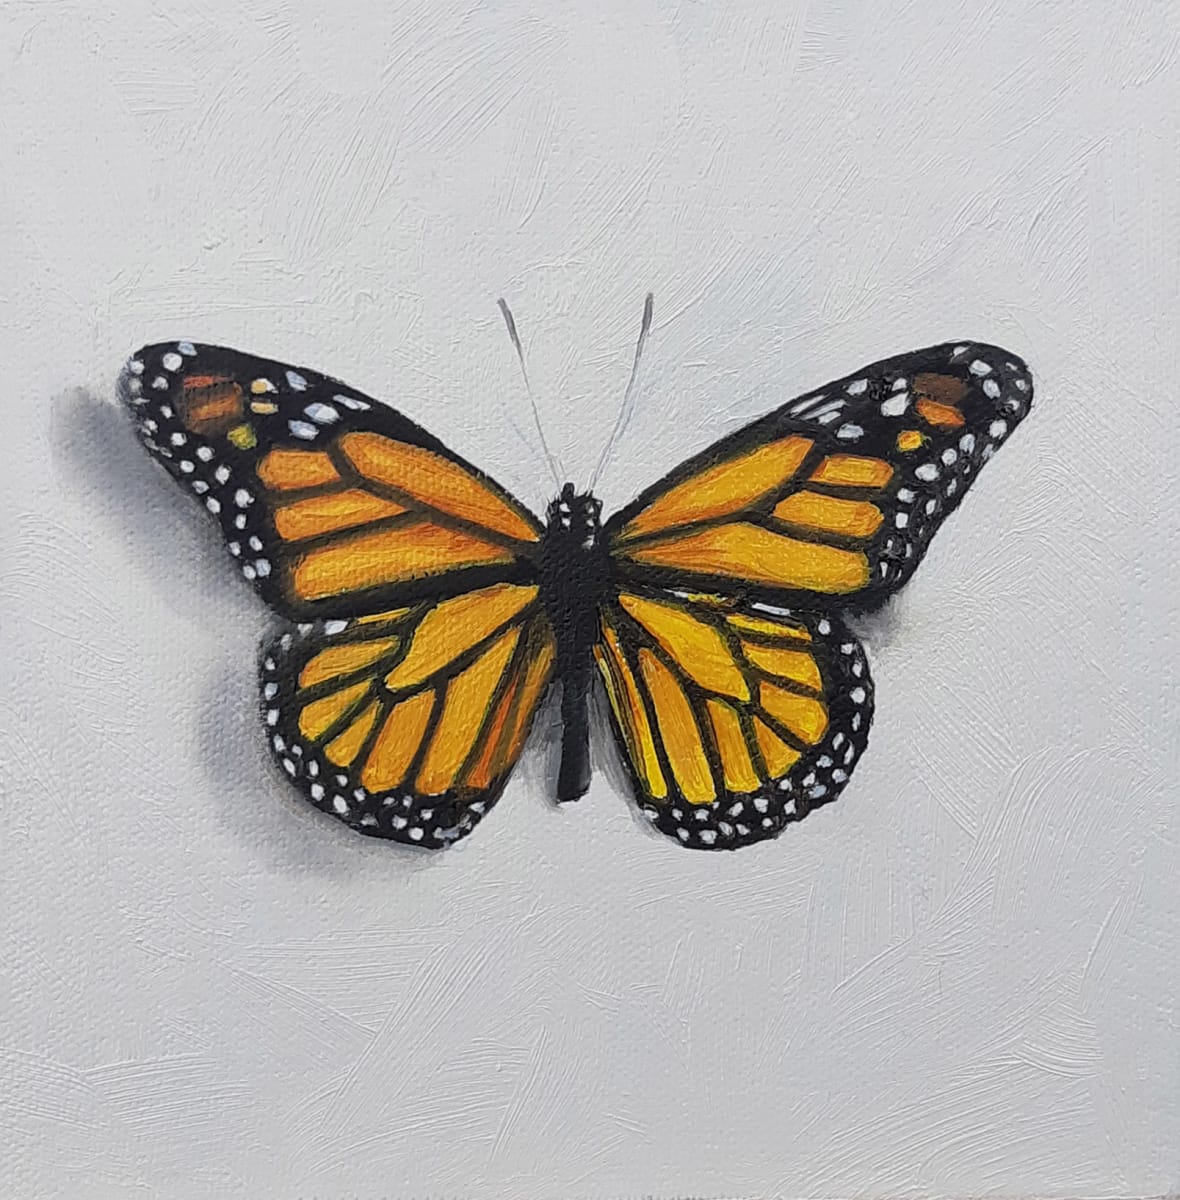 Small Monarch by Catherine Mills  Image: Small Monarch, 6 x 6 inches, oil on panel